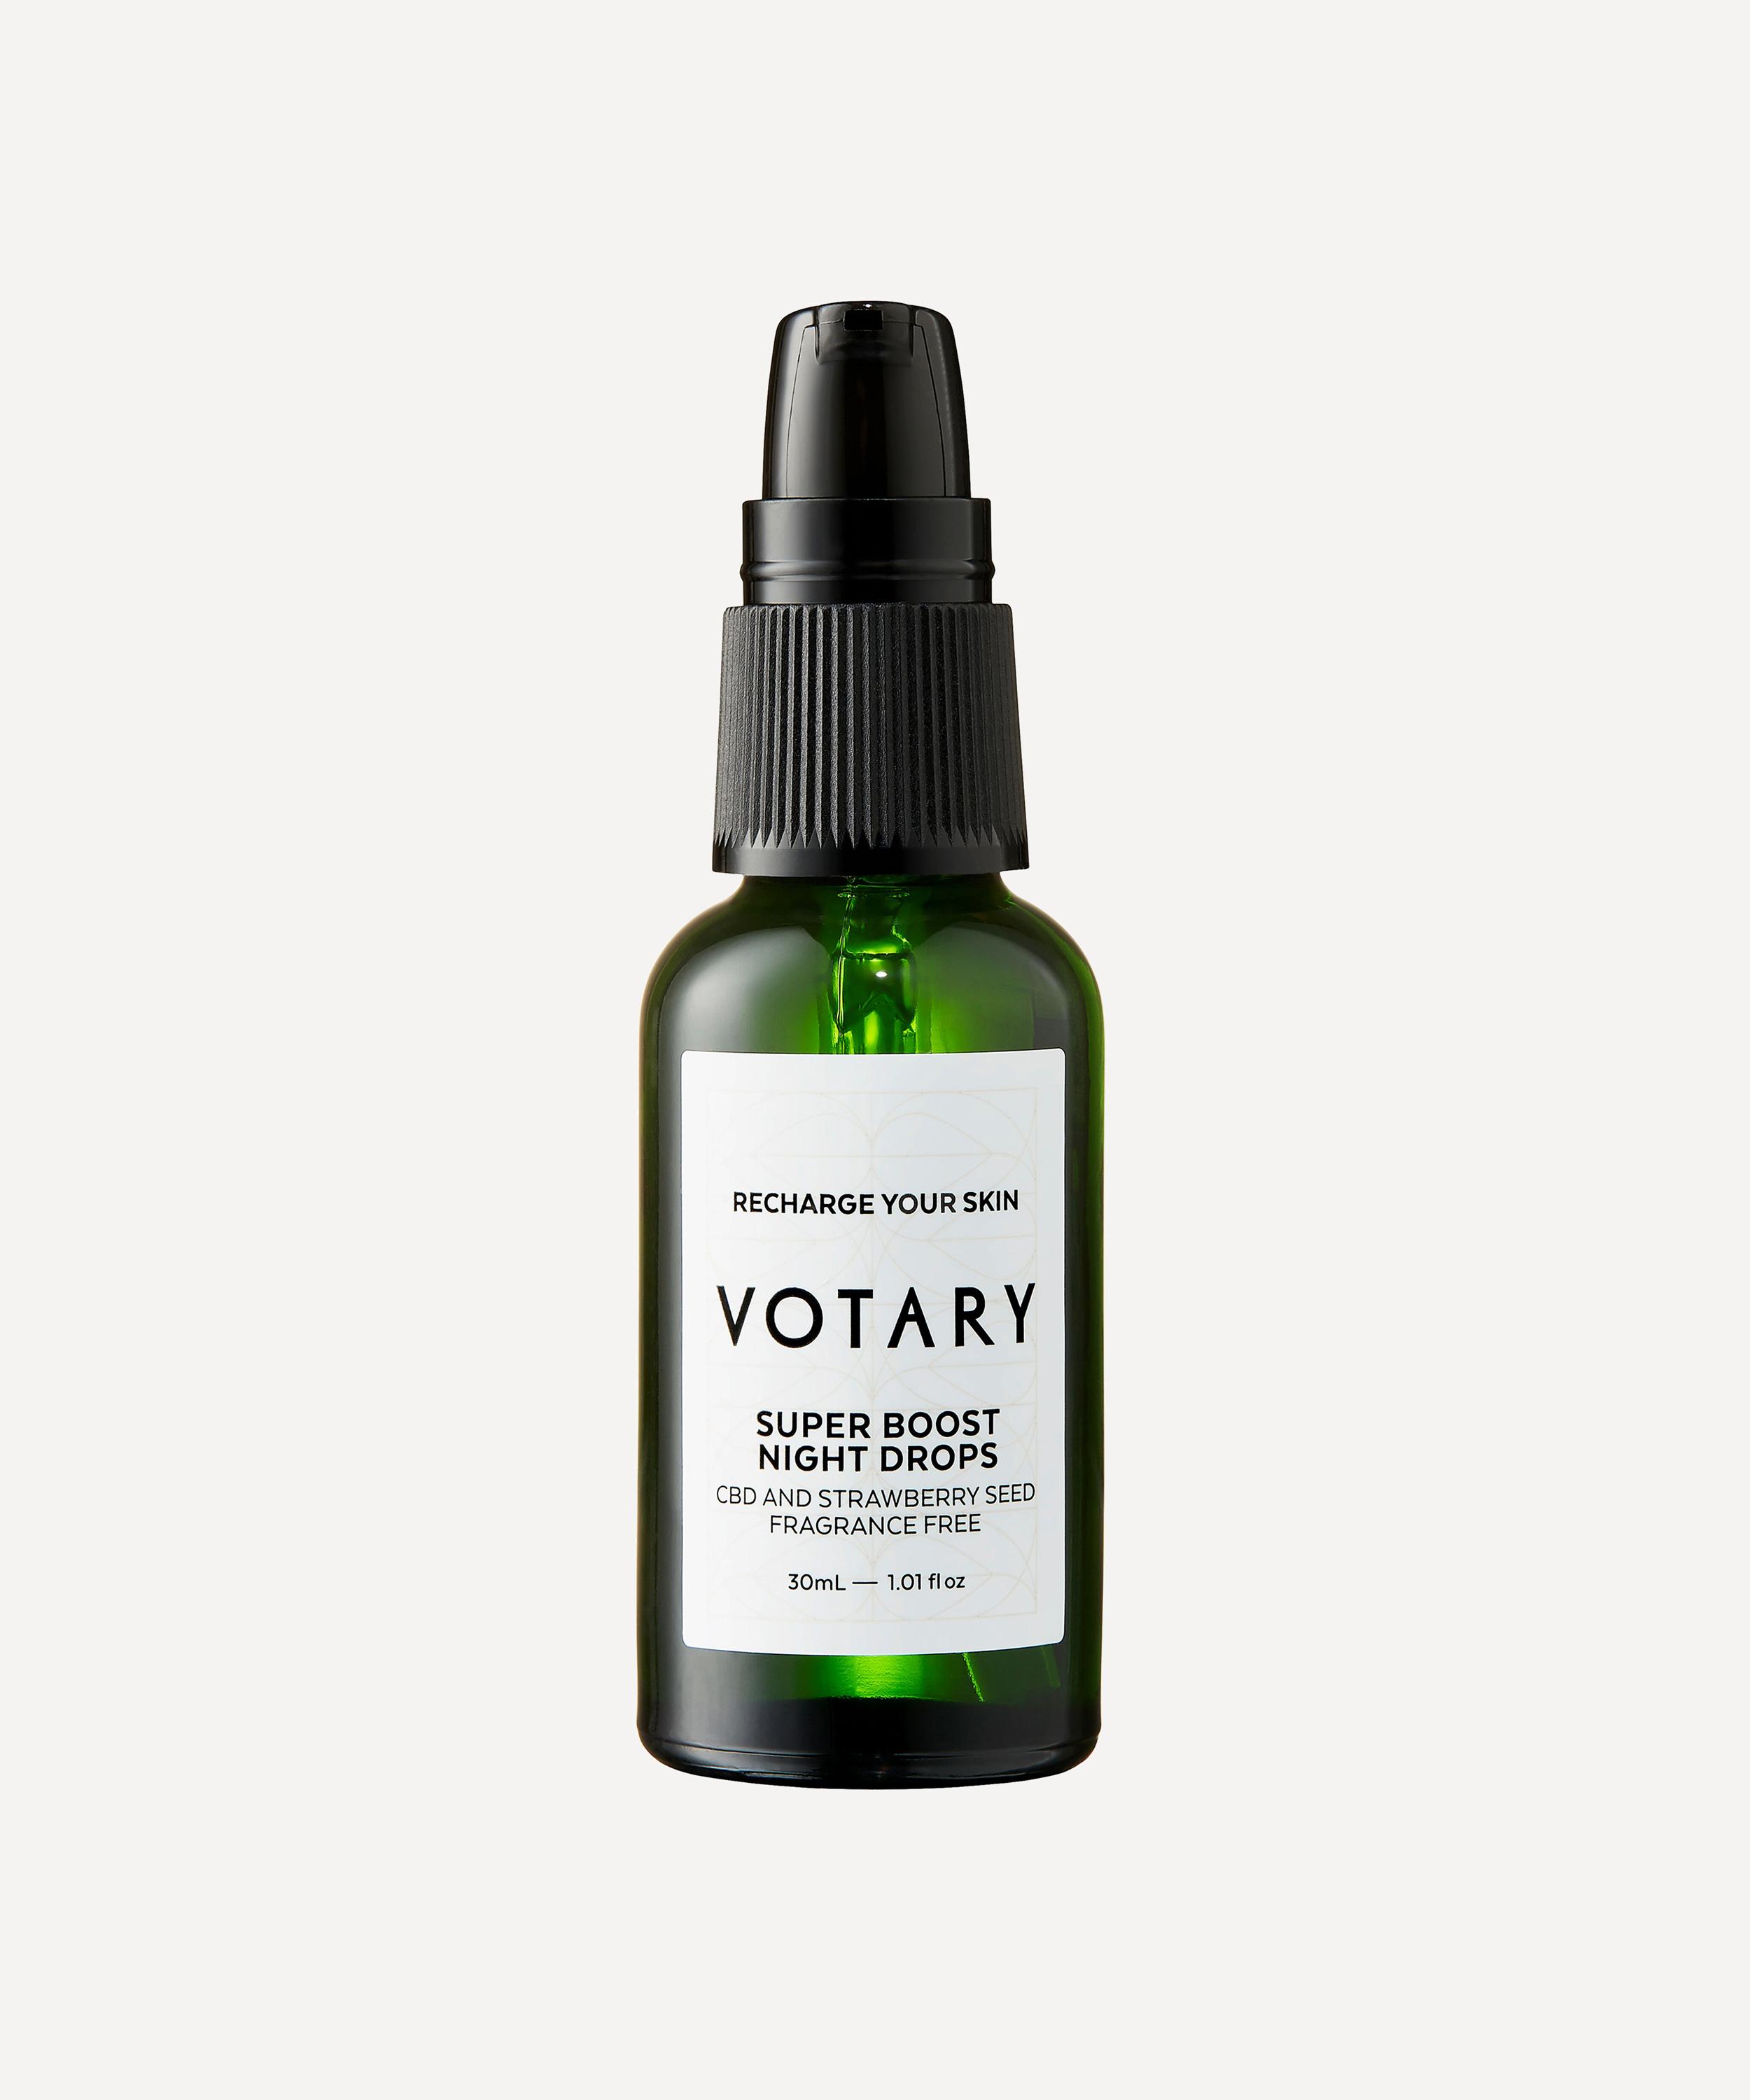 VOTARY SUPER BOOST NIGHT DROPS CBD AND STRAWBERRY SEED 30ML,000638109